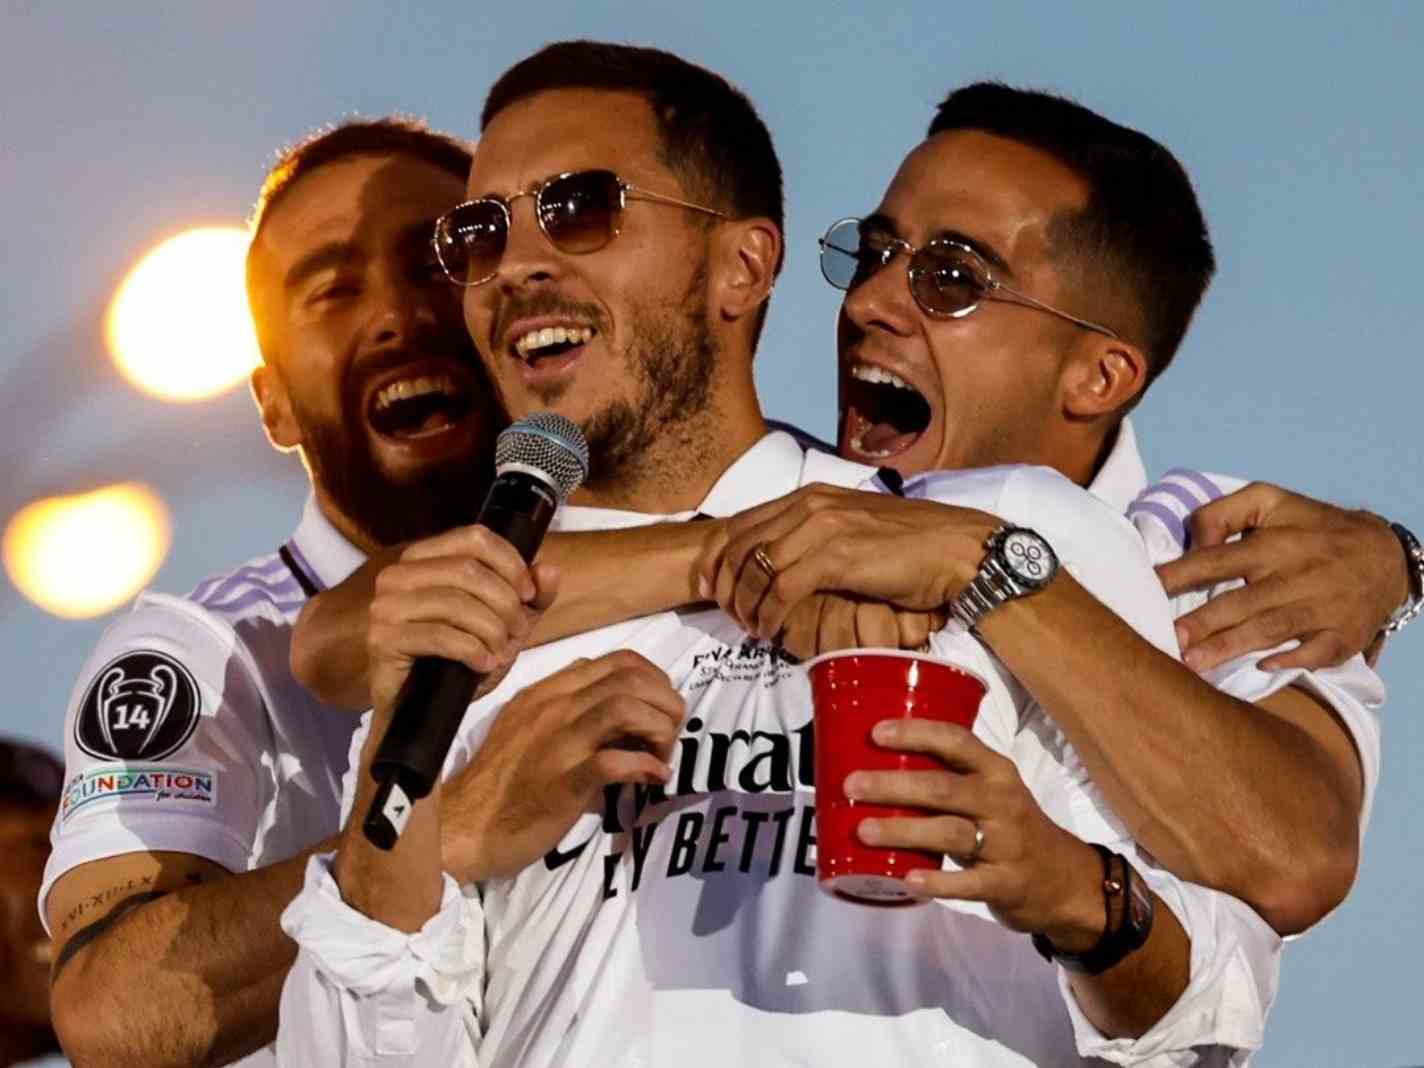 What Eden Hazard said during bus parade that made Real Madrid players pounce on him